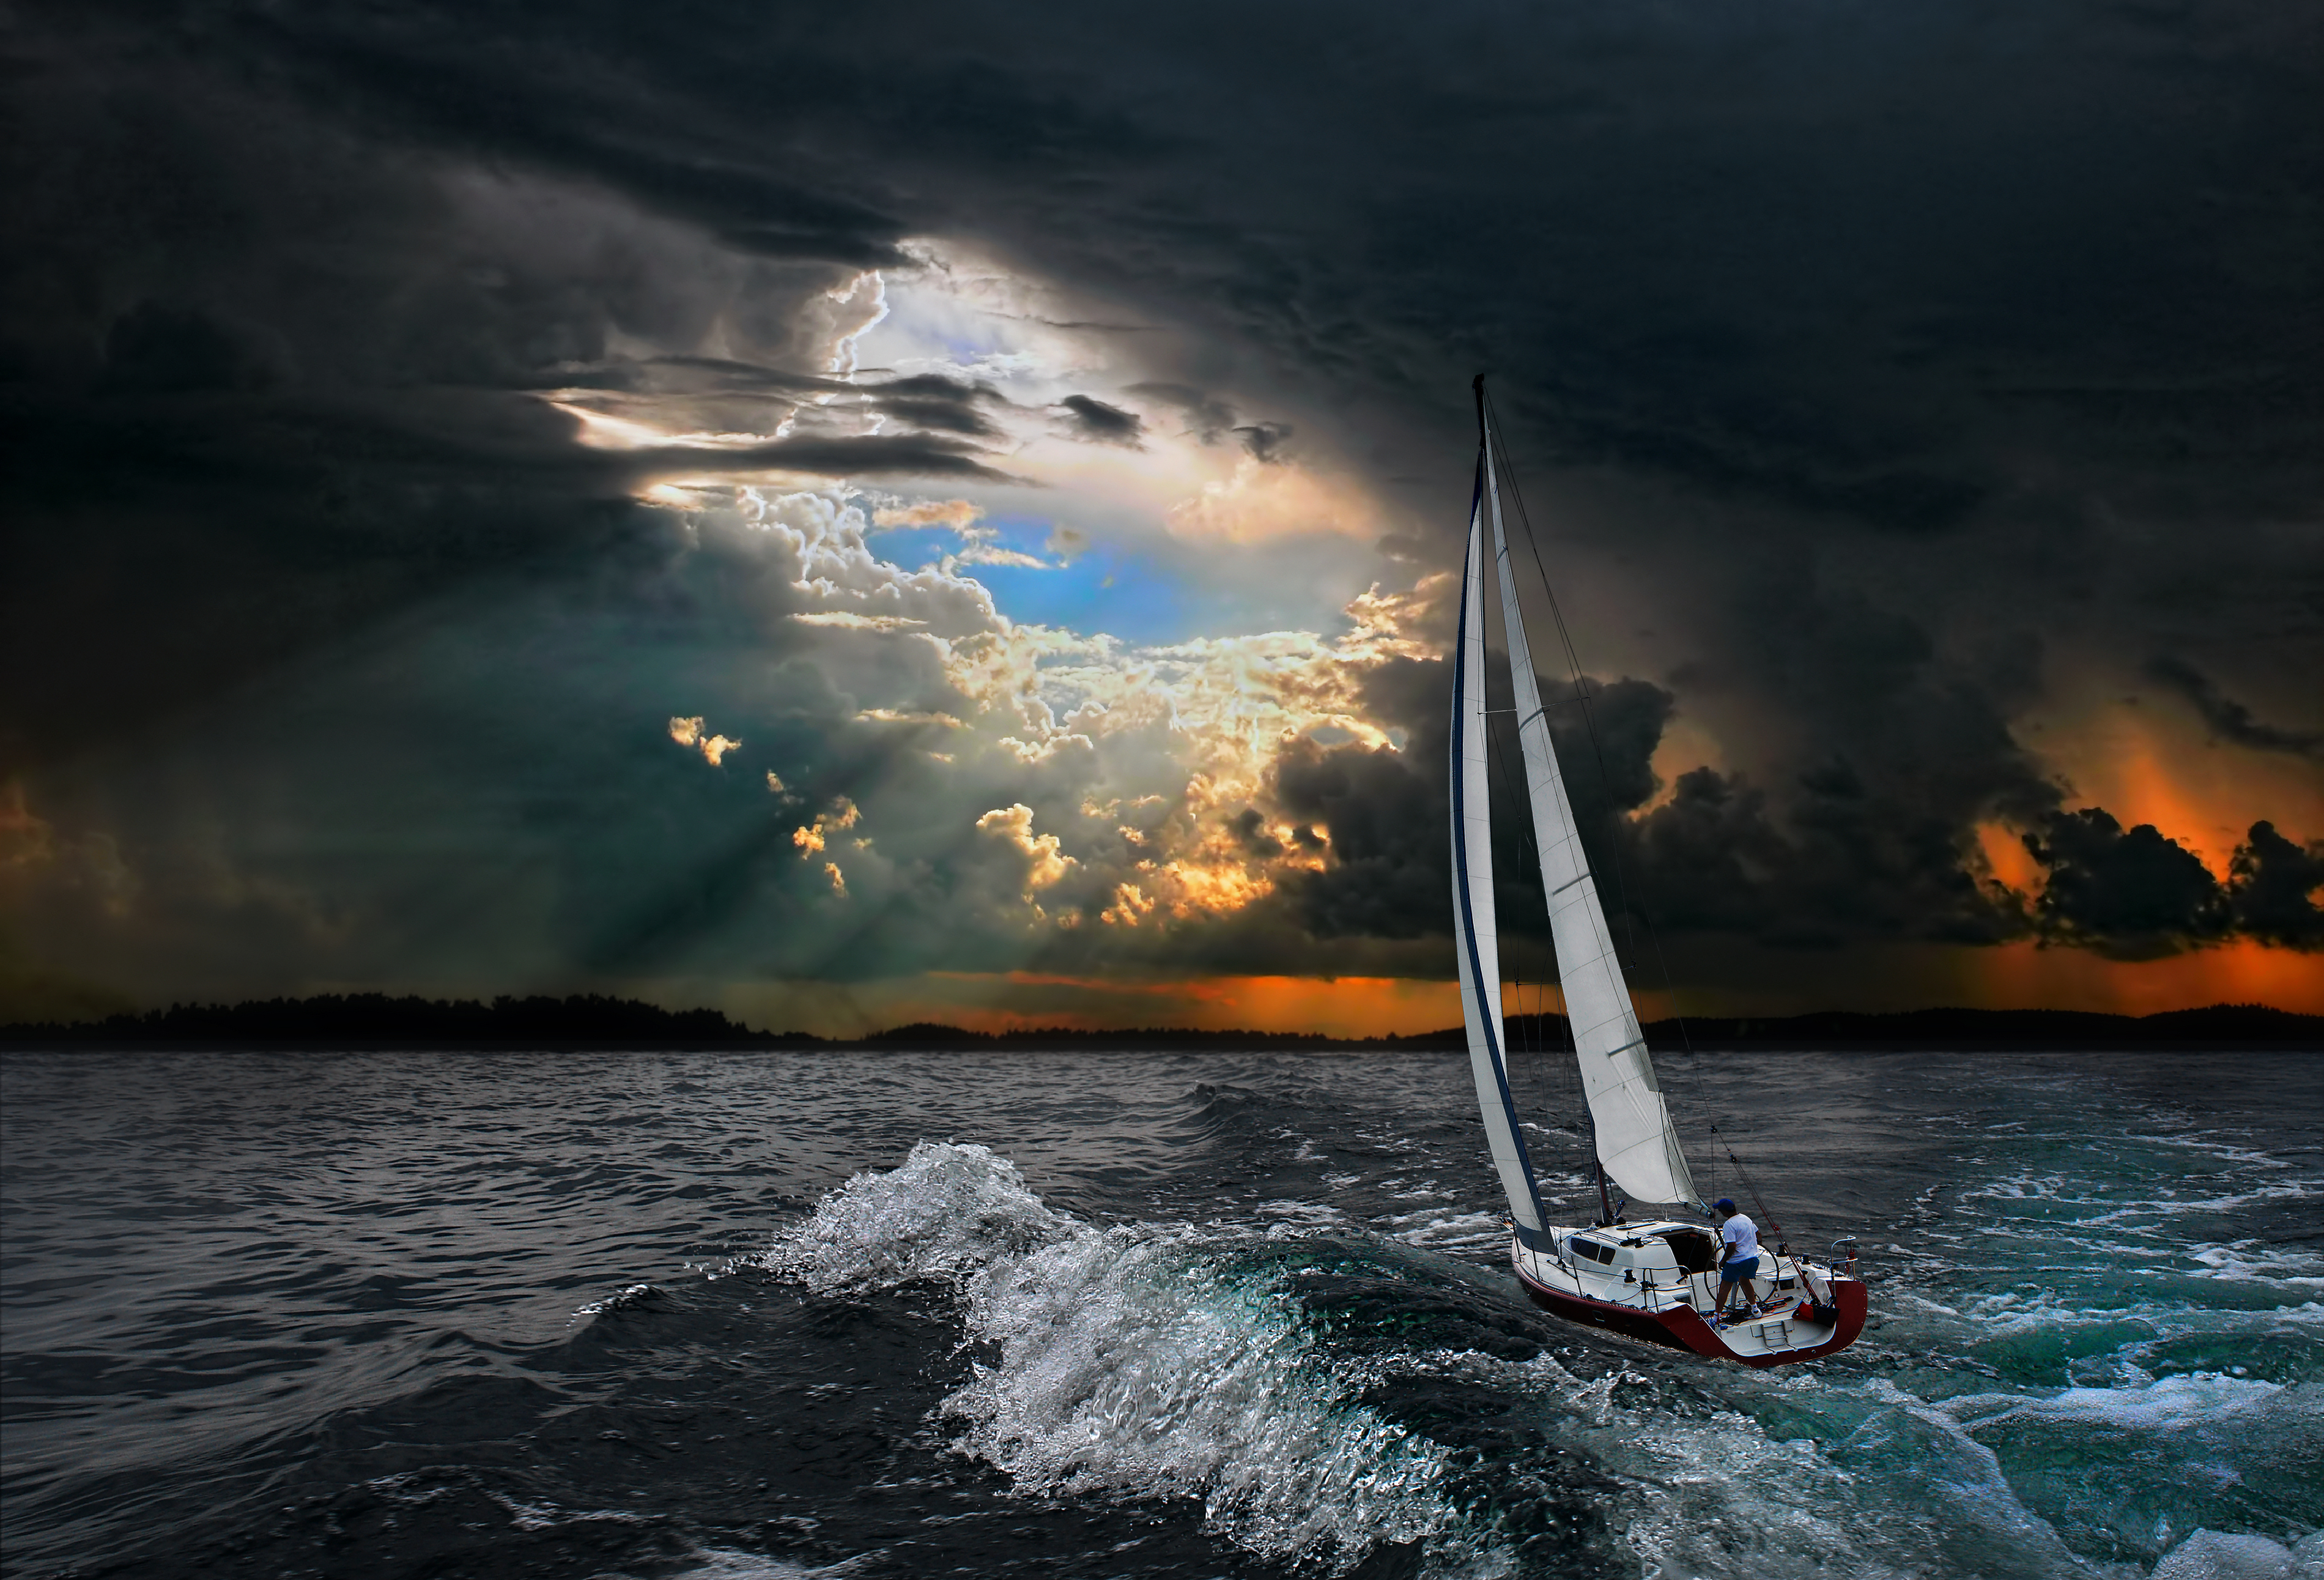 Sailboat on stormy sea with sunlight in the distance